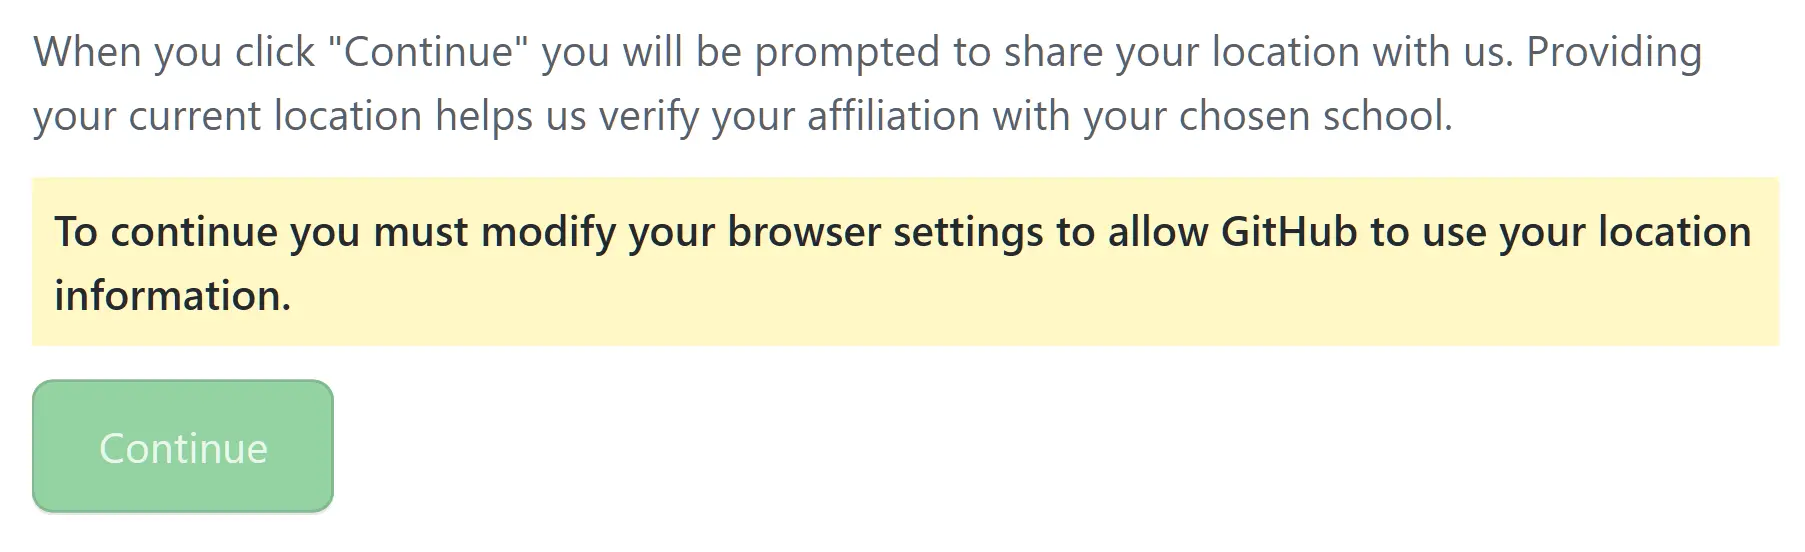 When you click &ldquo;Continue&rdquo; you will be prompted to share your location with us. Providing your current location helps us verify your affiliation with your chosen school. To continue you must modify your browser settings to allow GitHub to use your location information. (日本語訳：[続行] をクリックすると、現在地を私たちと共有するよう求められます。  現在地を提供すると、選択した学校との所属を確認するのに役立ちます。続行するには、ブラウザーの設定を変更して、GitHub が位置情報を使用できるようにする必要があります。)